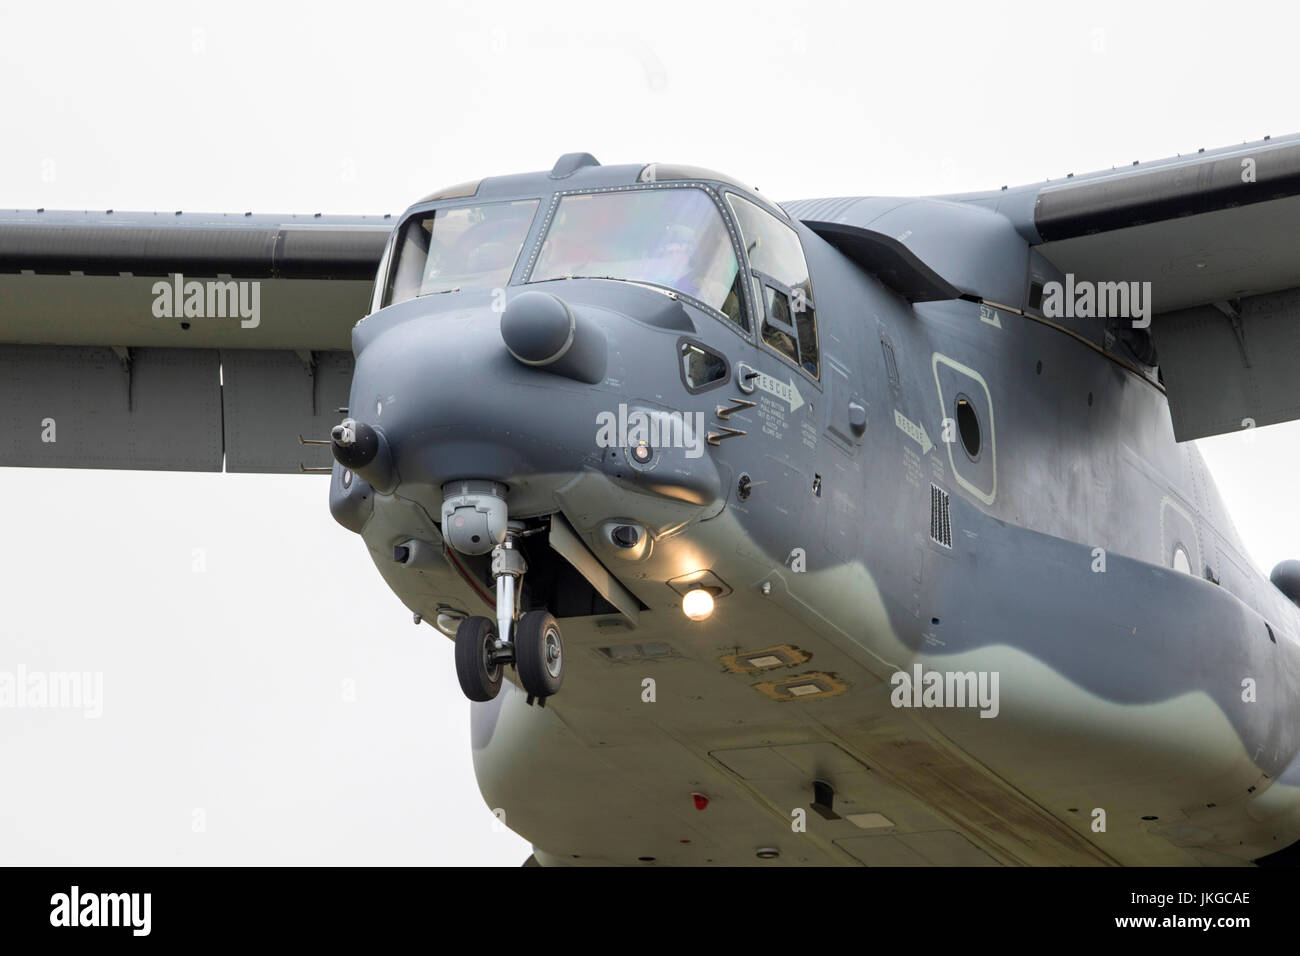 United States Marine Corps Bell Boeing V-22 Osprey tiltrotor military aircraft at RIAT 2017 Stock Photo